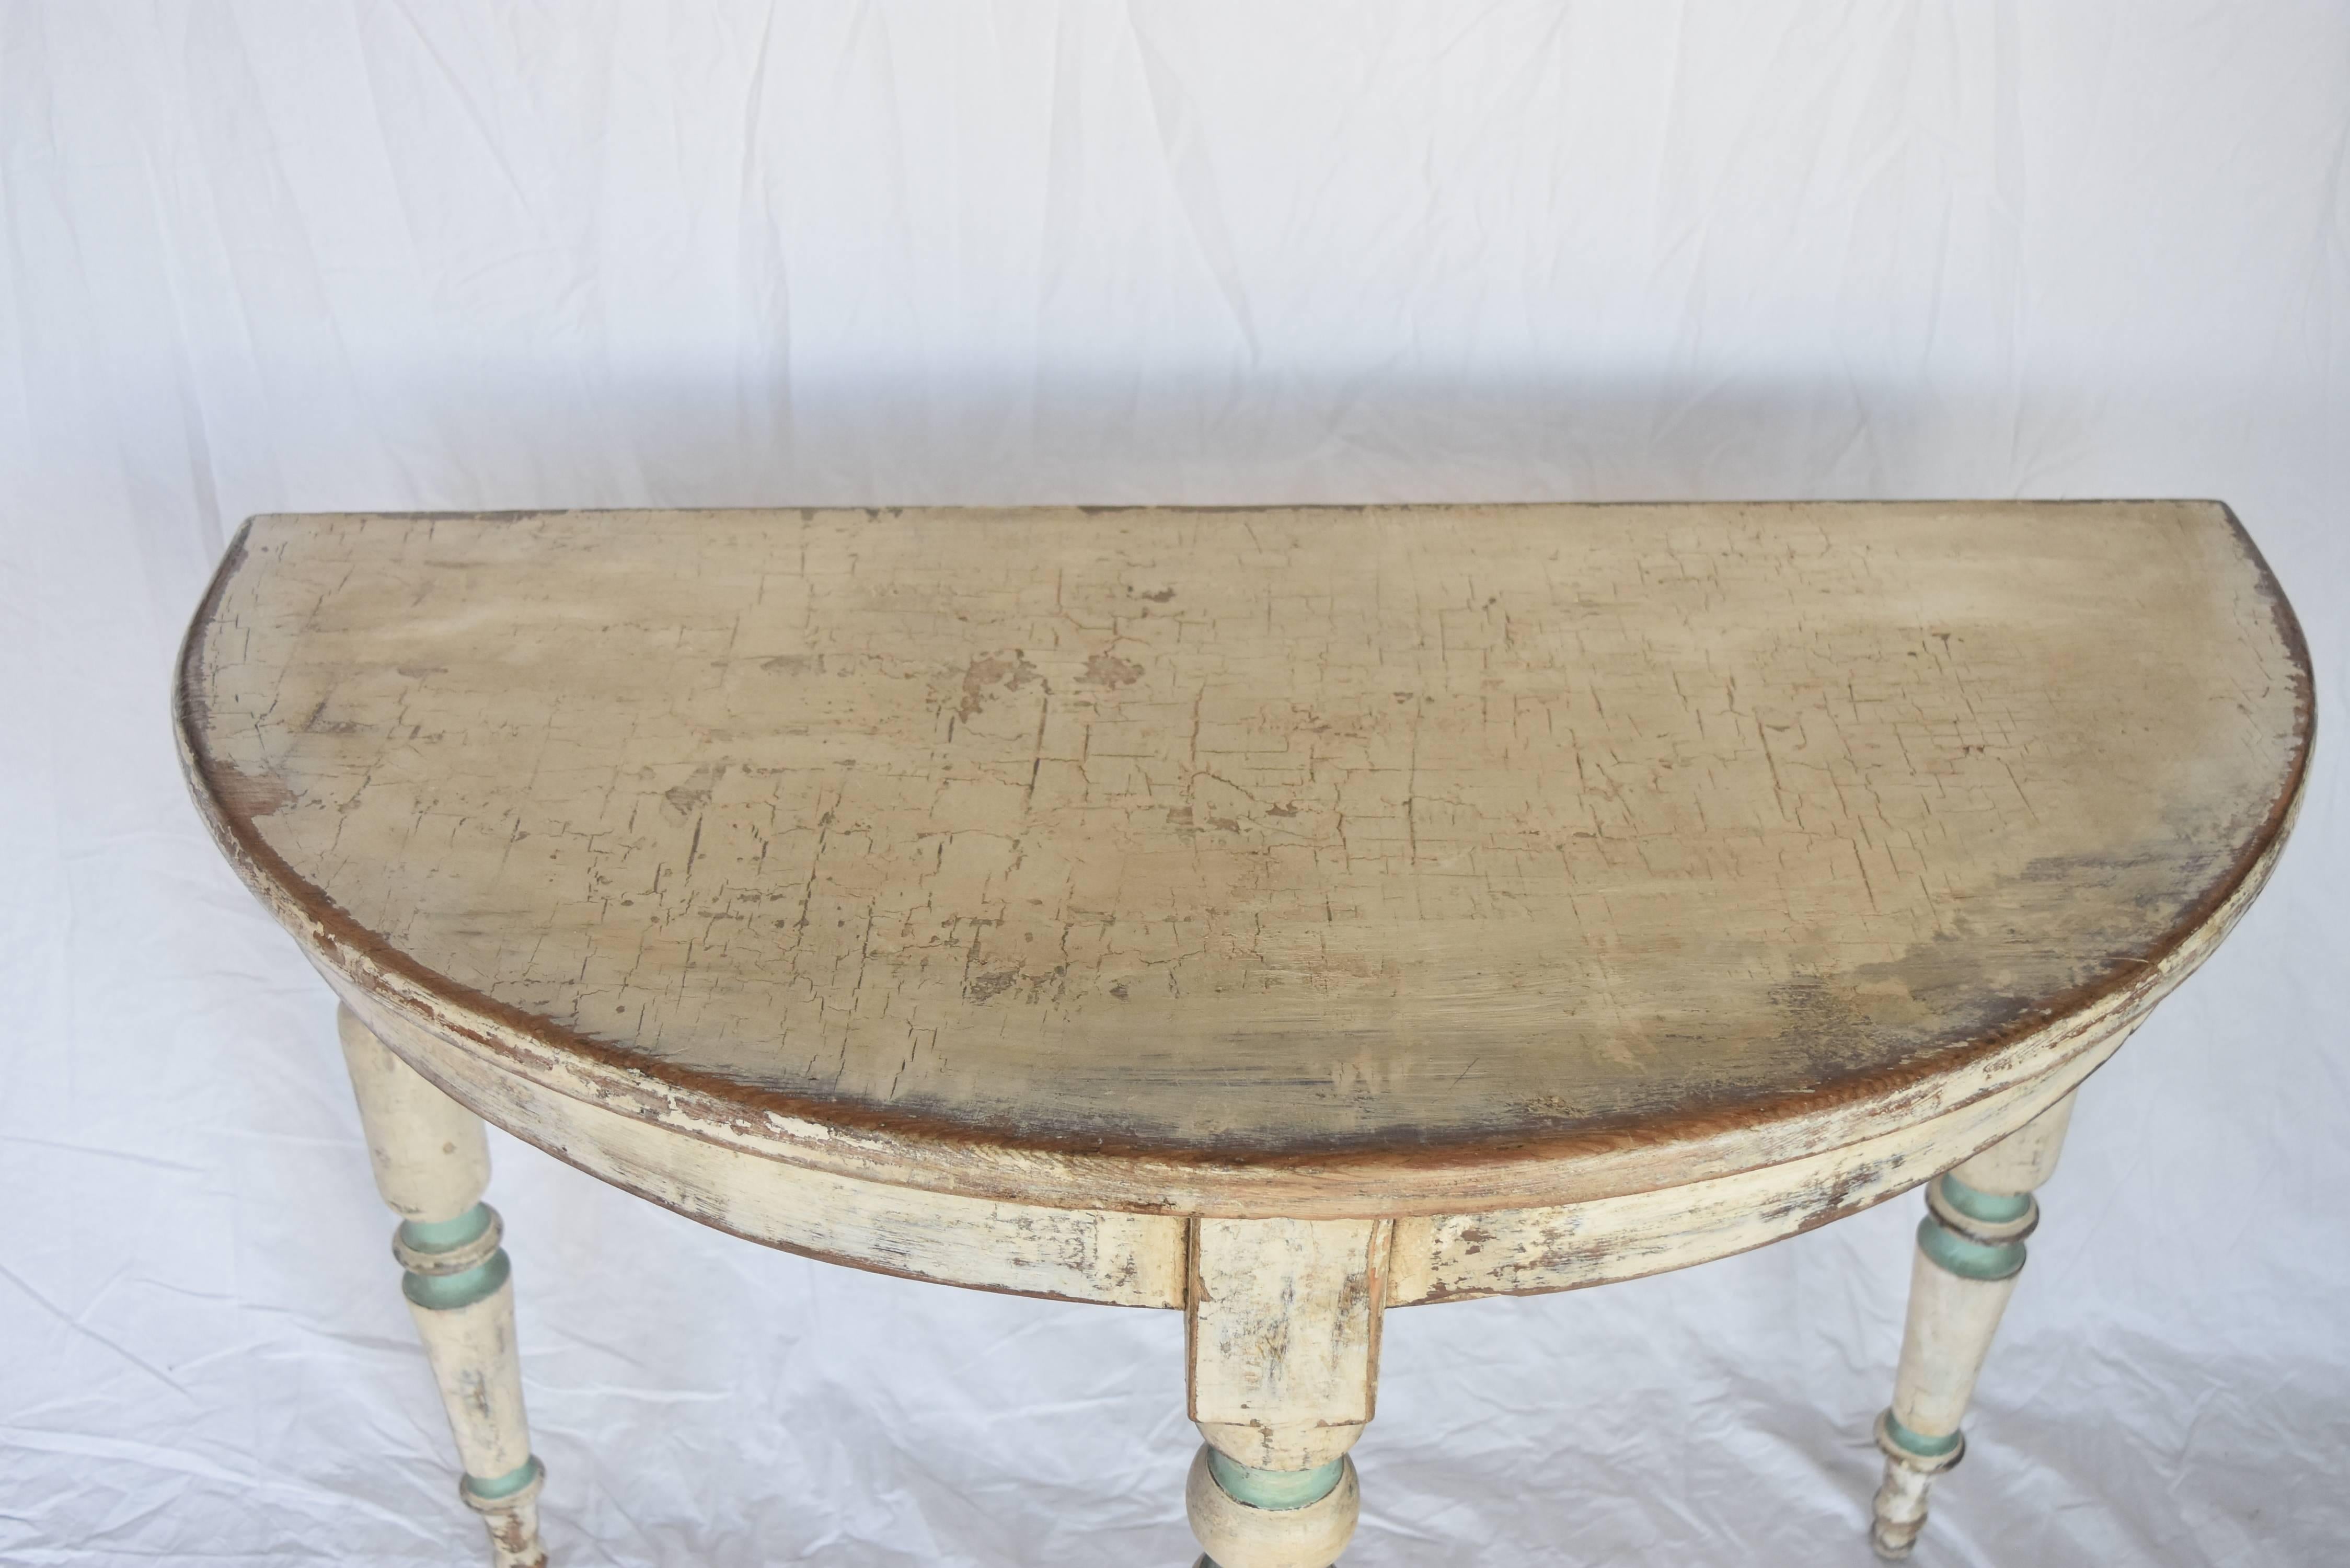 Wood Spanish 1900s Demilune Tables With Later Creamy White Paint And Blue Accents